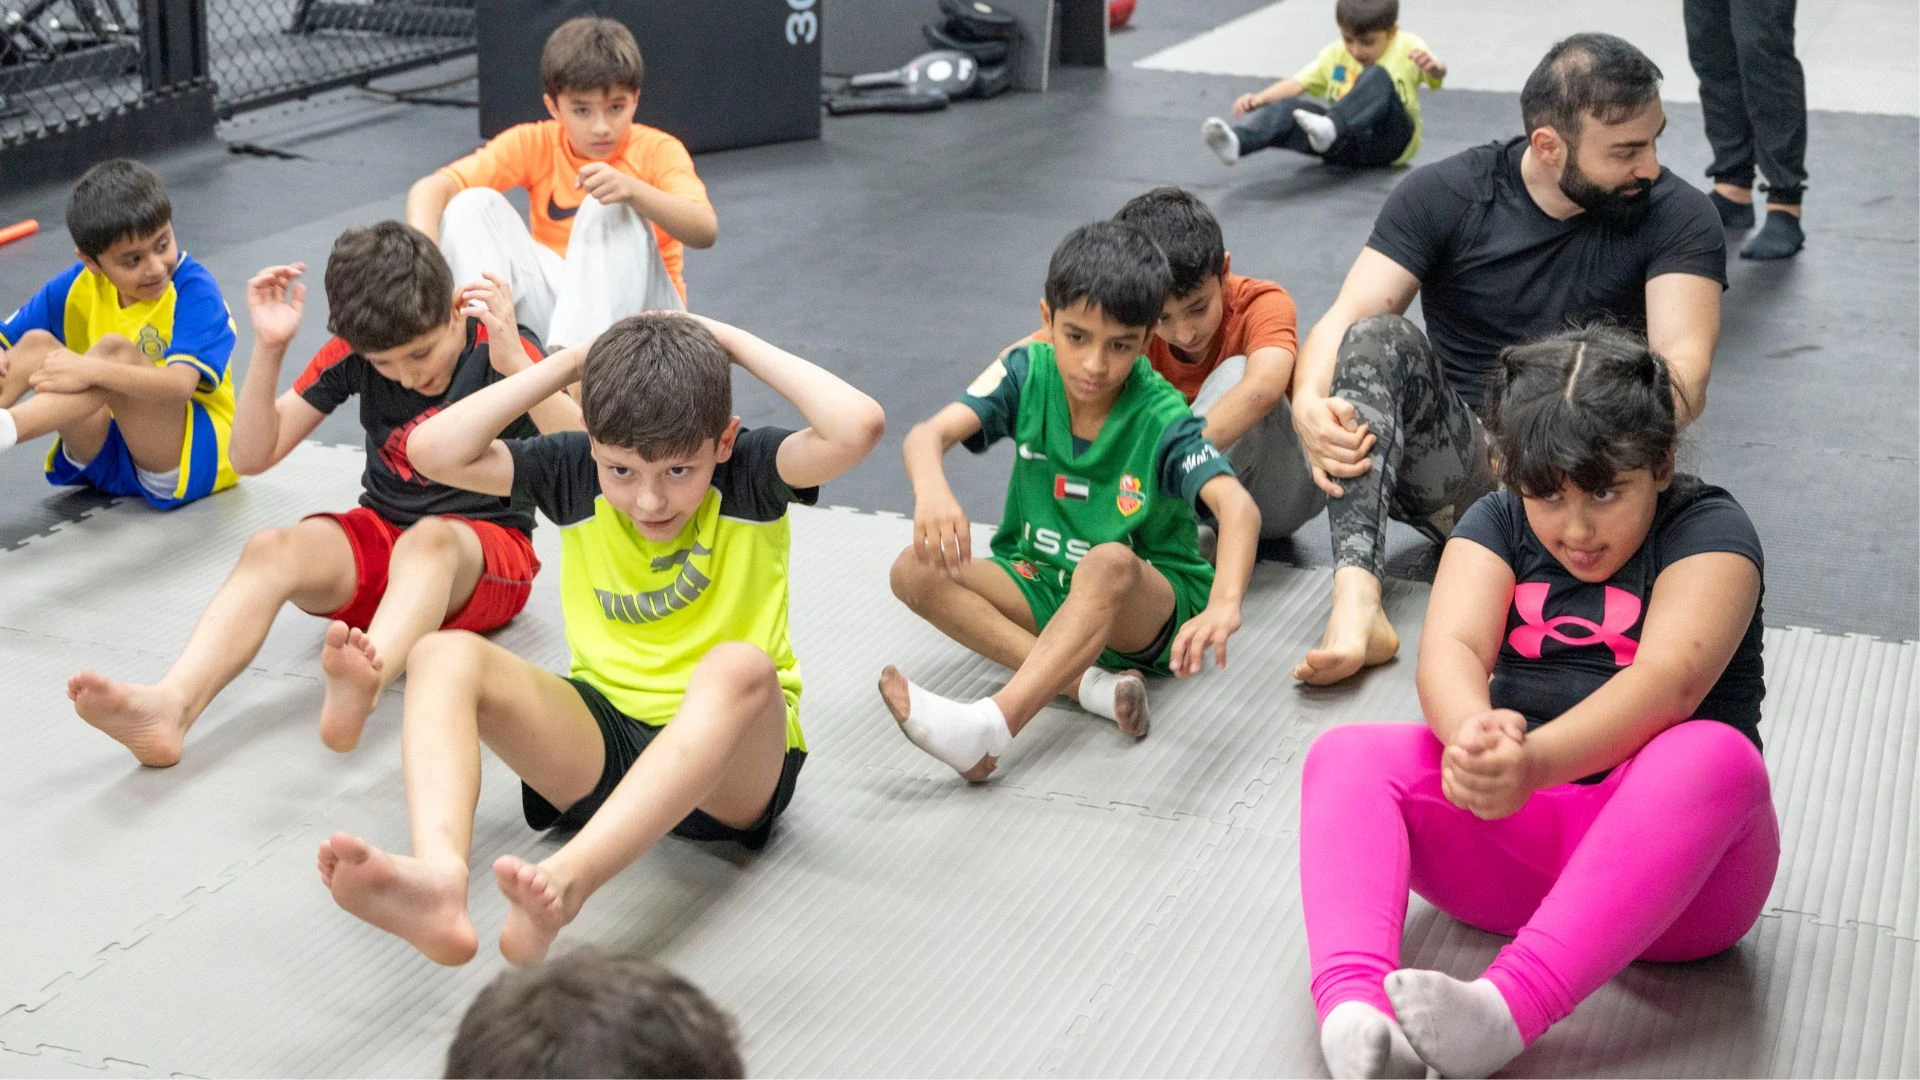 Personal Trainer of martial arts for kids in Dubai